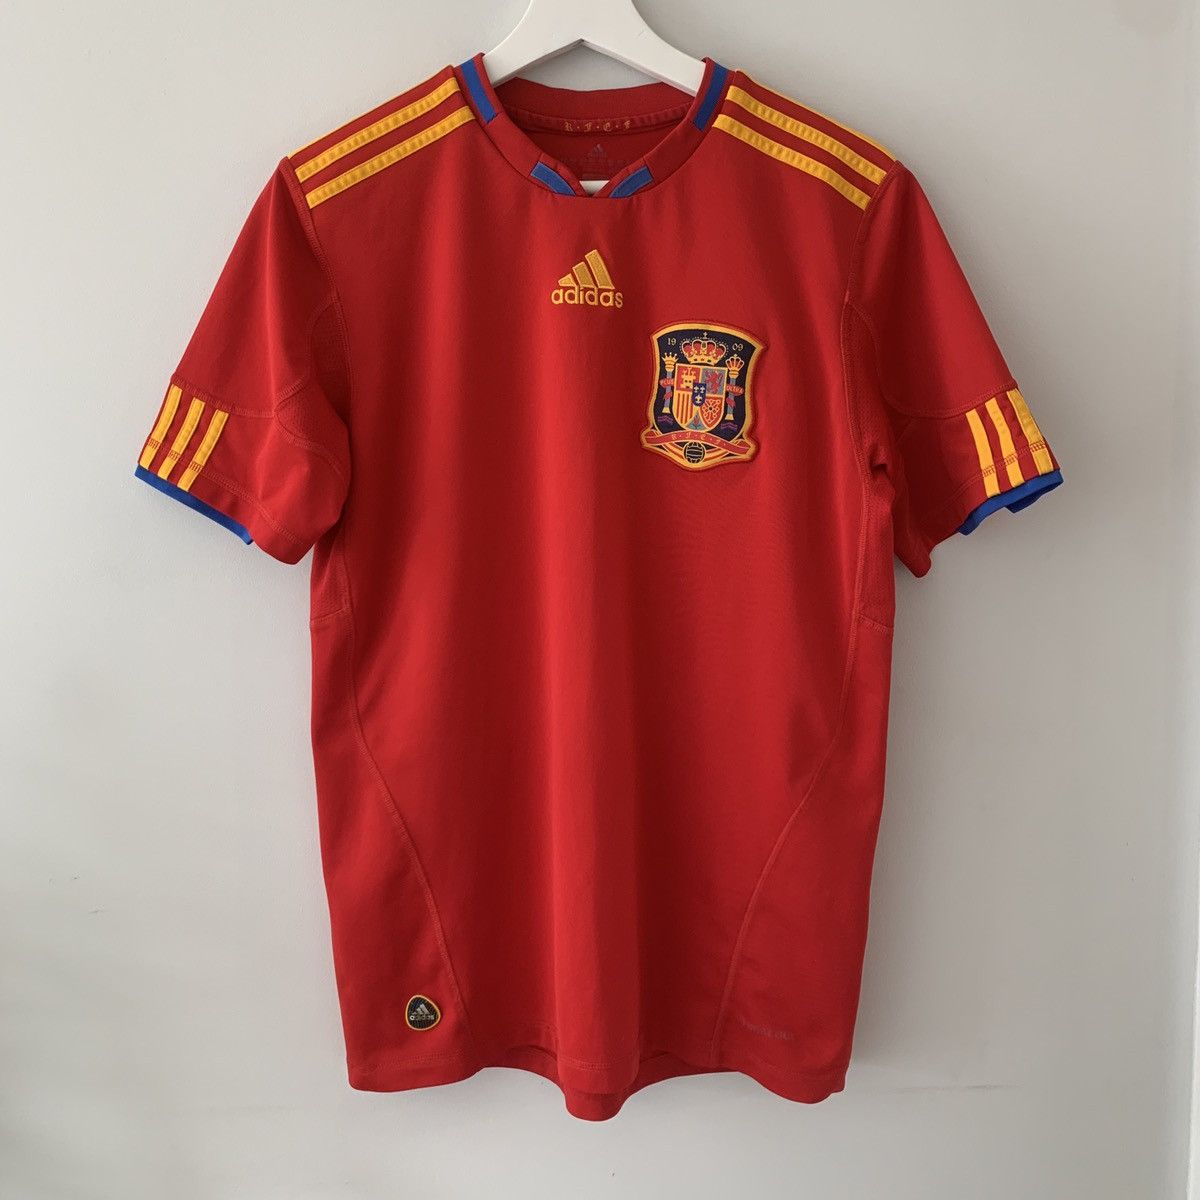 Adidas Adidas 2010 Spain RFCF Soccer Jersey World Cup Drake Style Size US M / EU 48-50 / 2 - 1 Preview